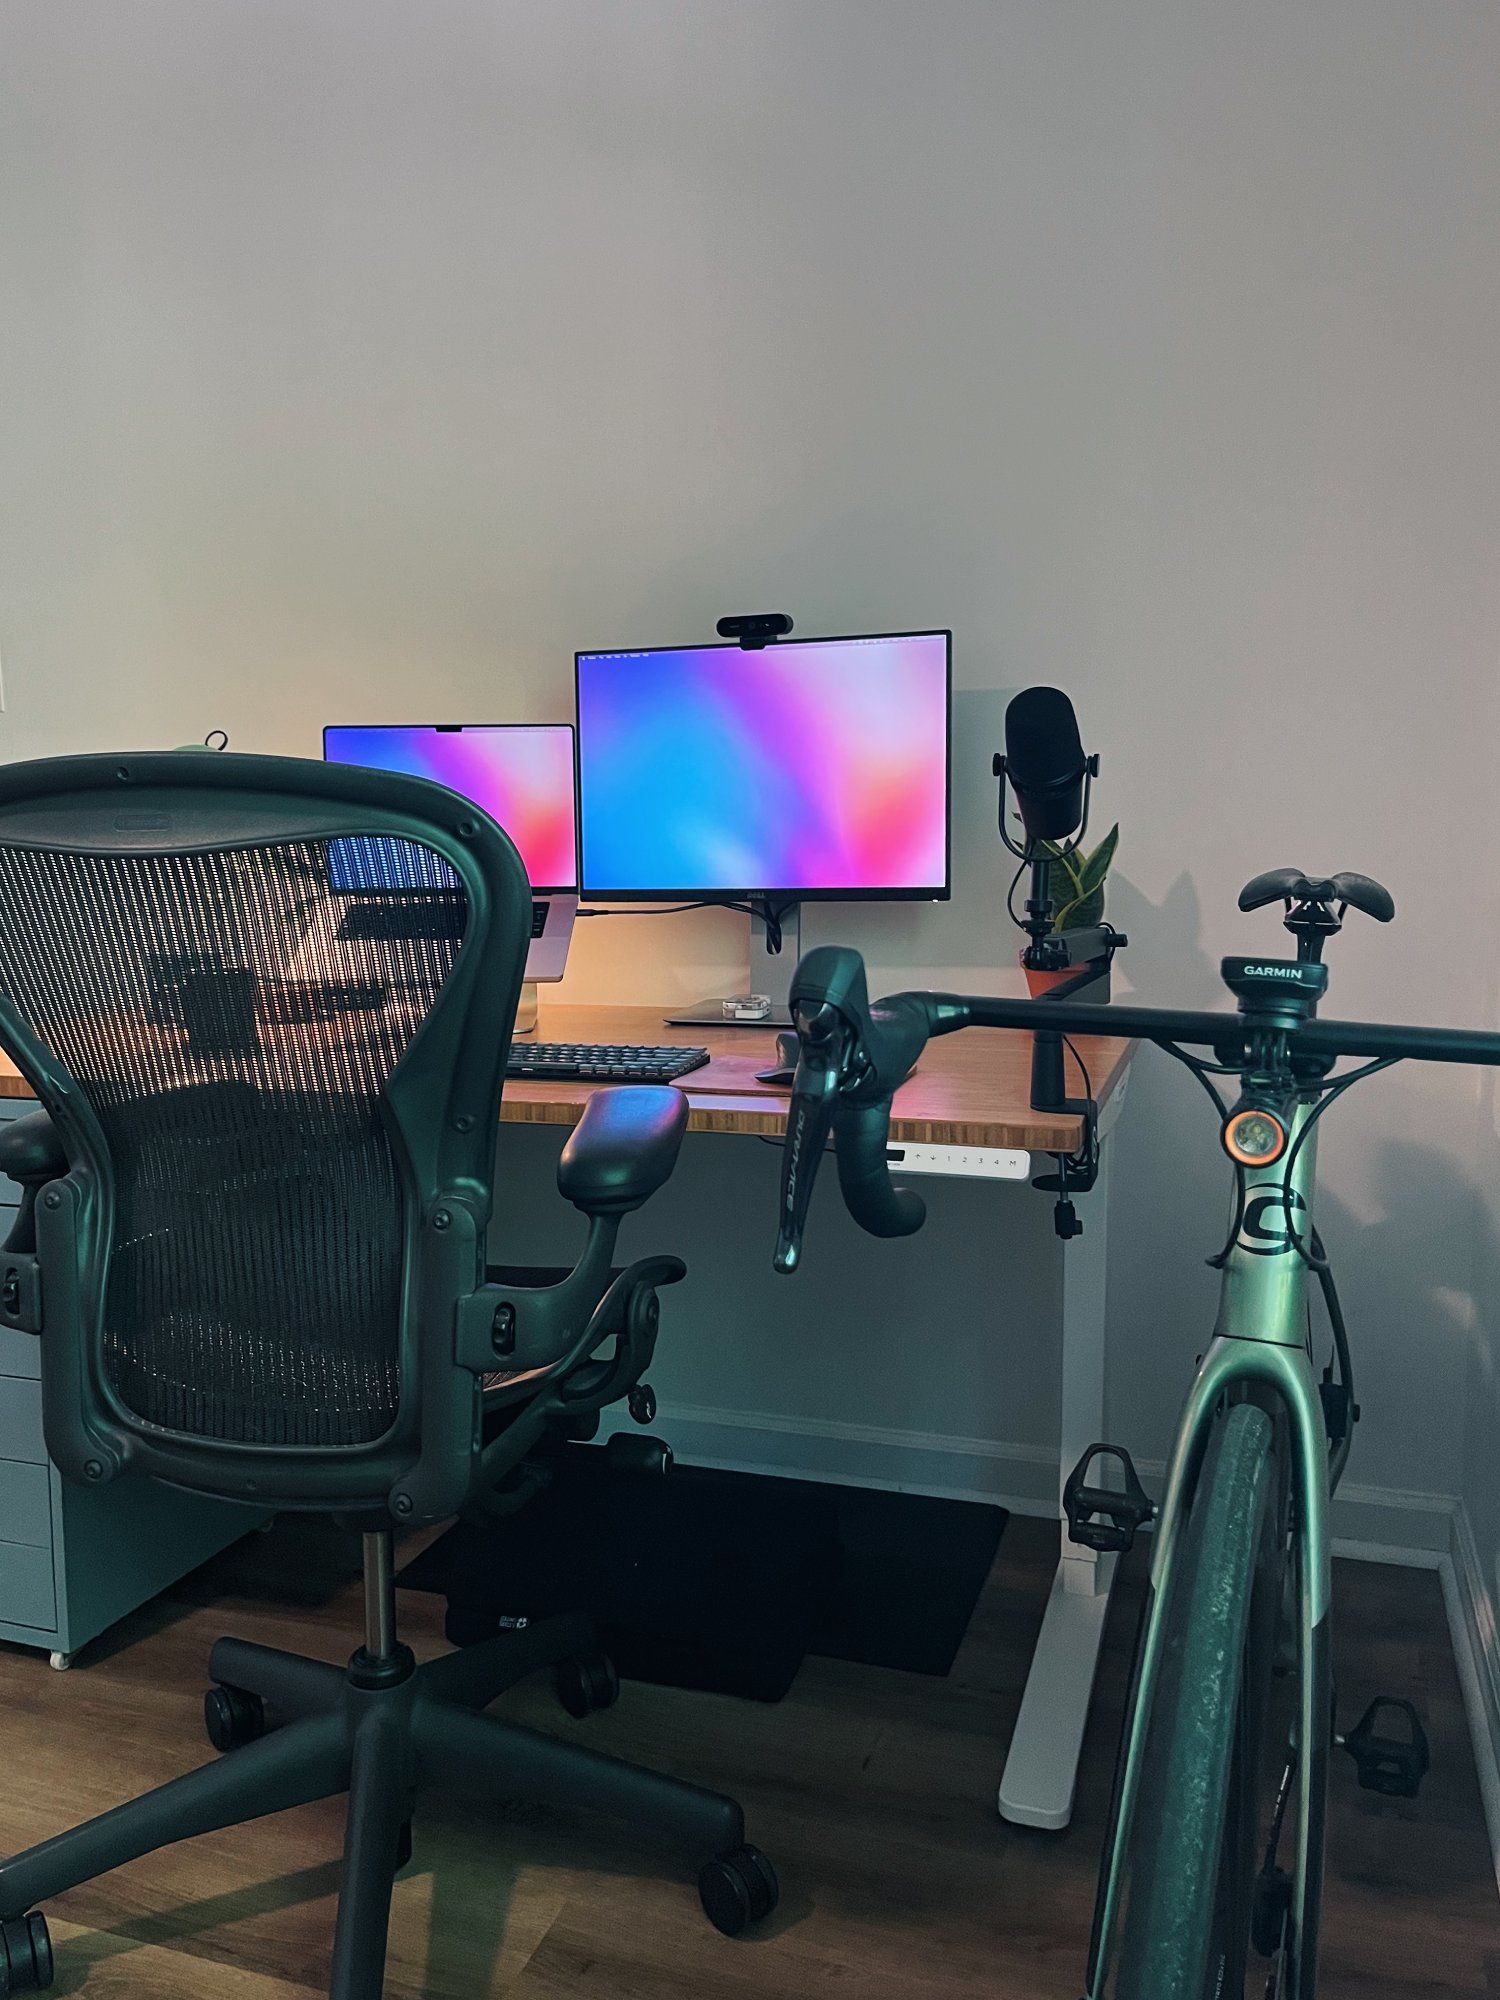  A Cannondale road bike next to the standing desk in a home office